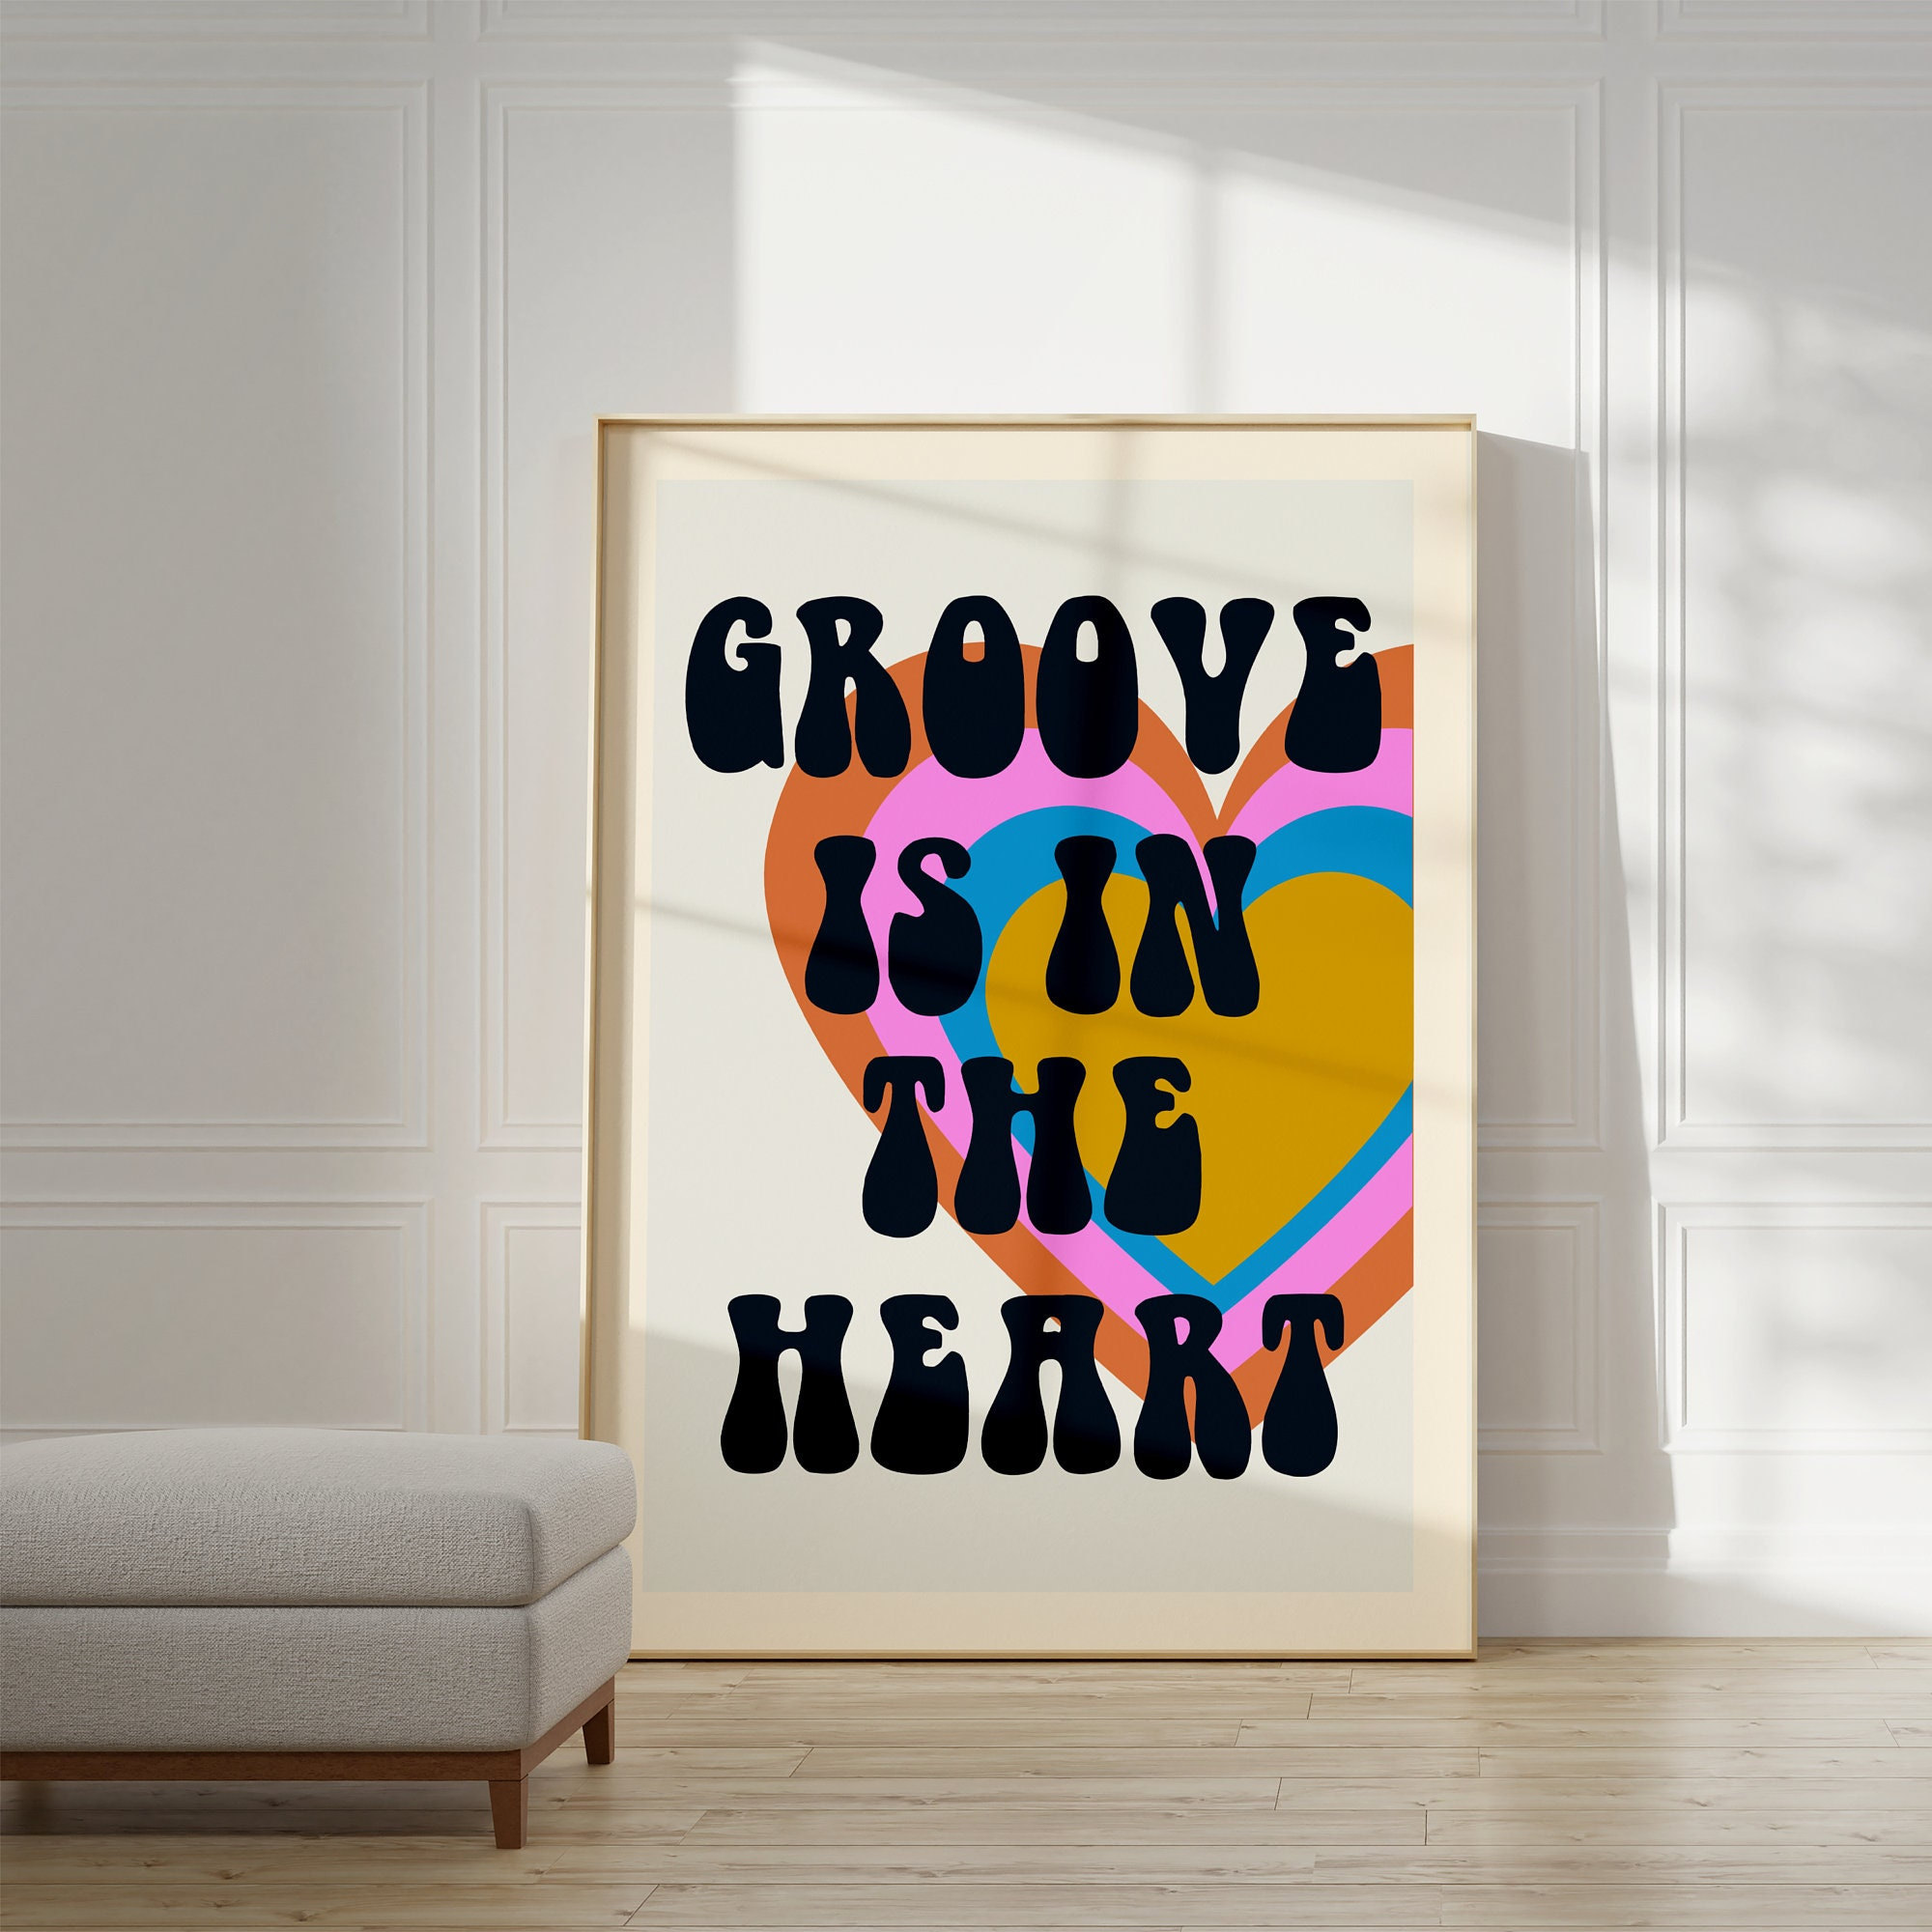 Inspired Music Print, Groove is in the Heart, Music Print, Lyrics Poster,  Gig Print, Disco Retro Poster Art, Vintage Old School Print , Gift 